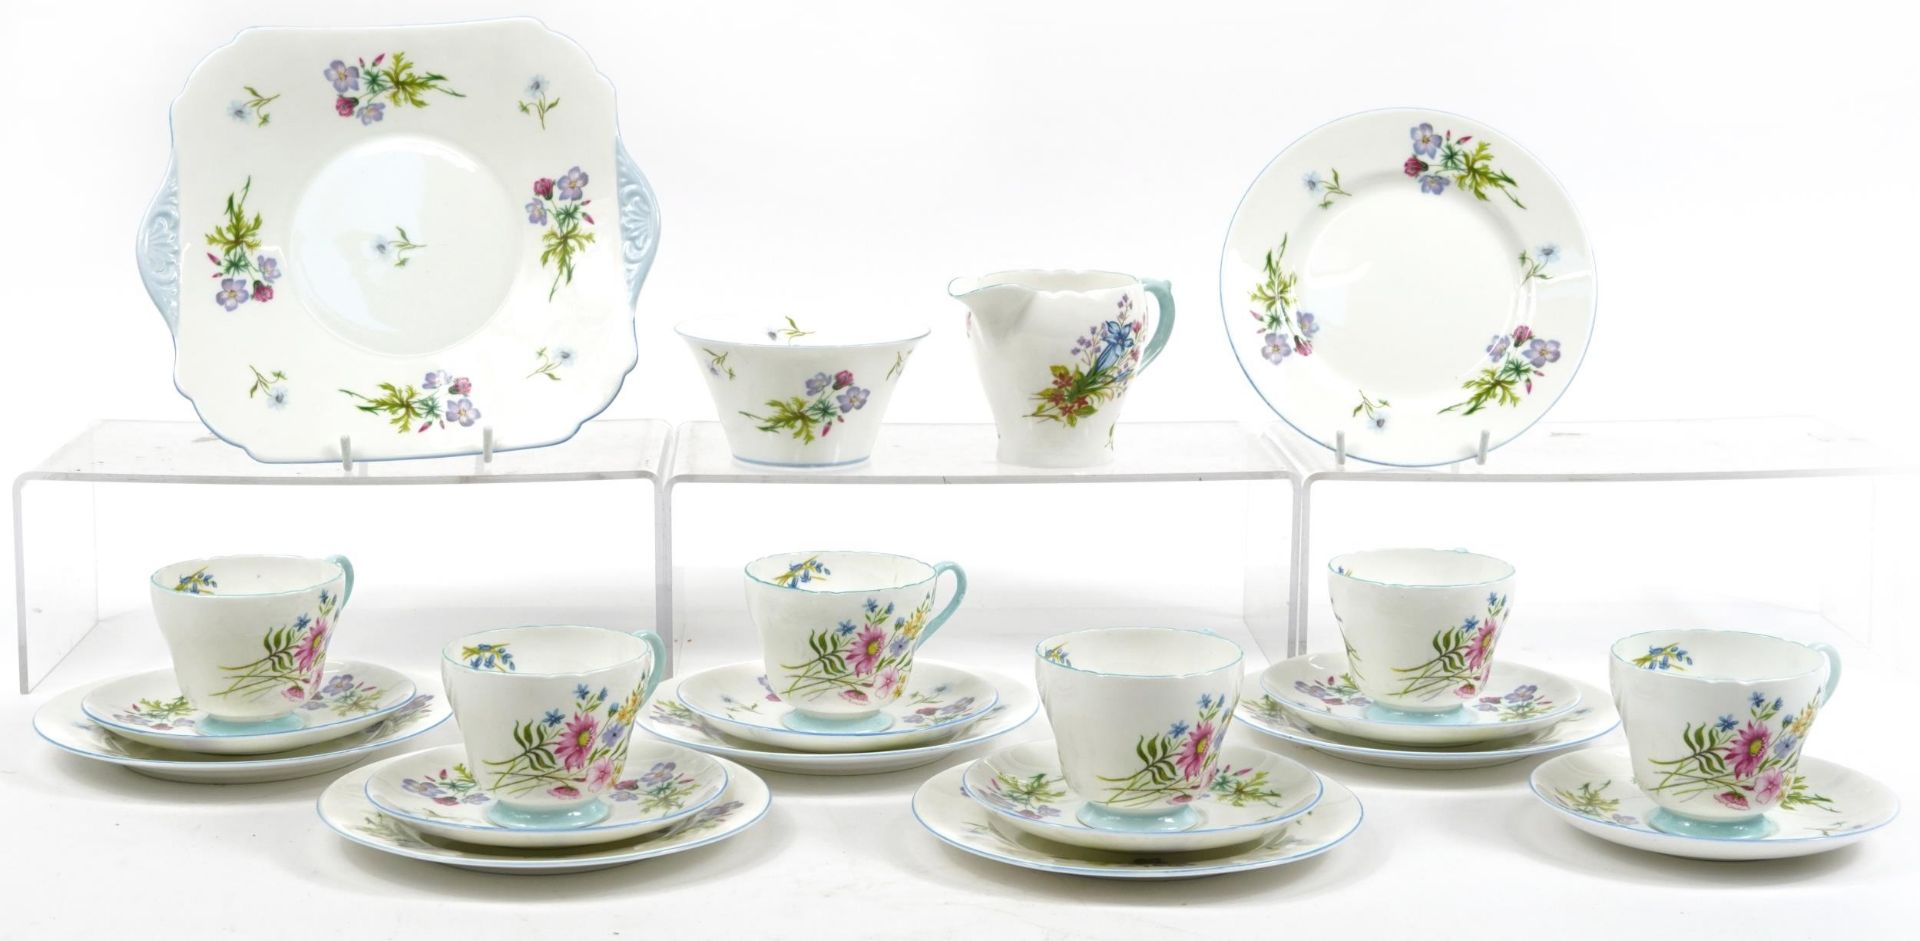 Shelley Wild Flowers teaware comprising six trios, milk jug, sugar bowl and cake plate, the